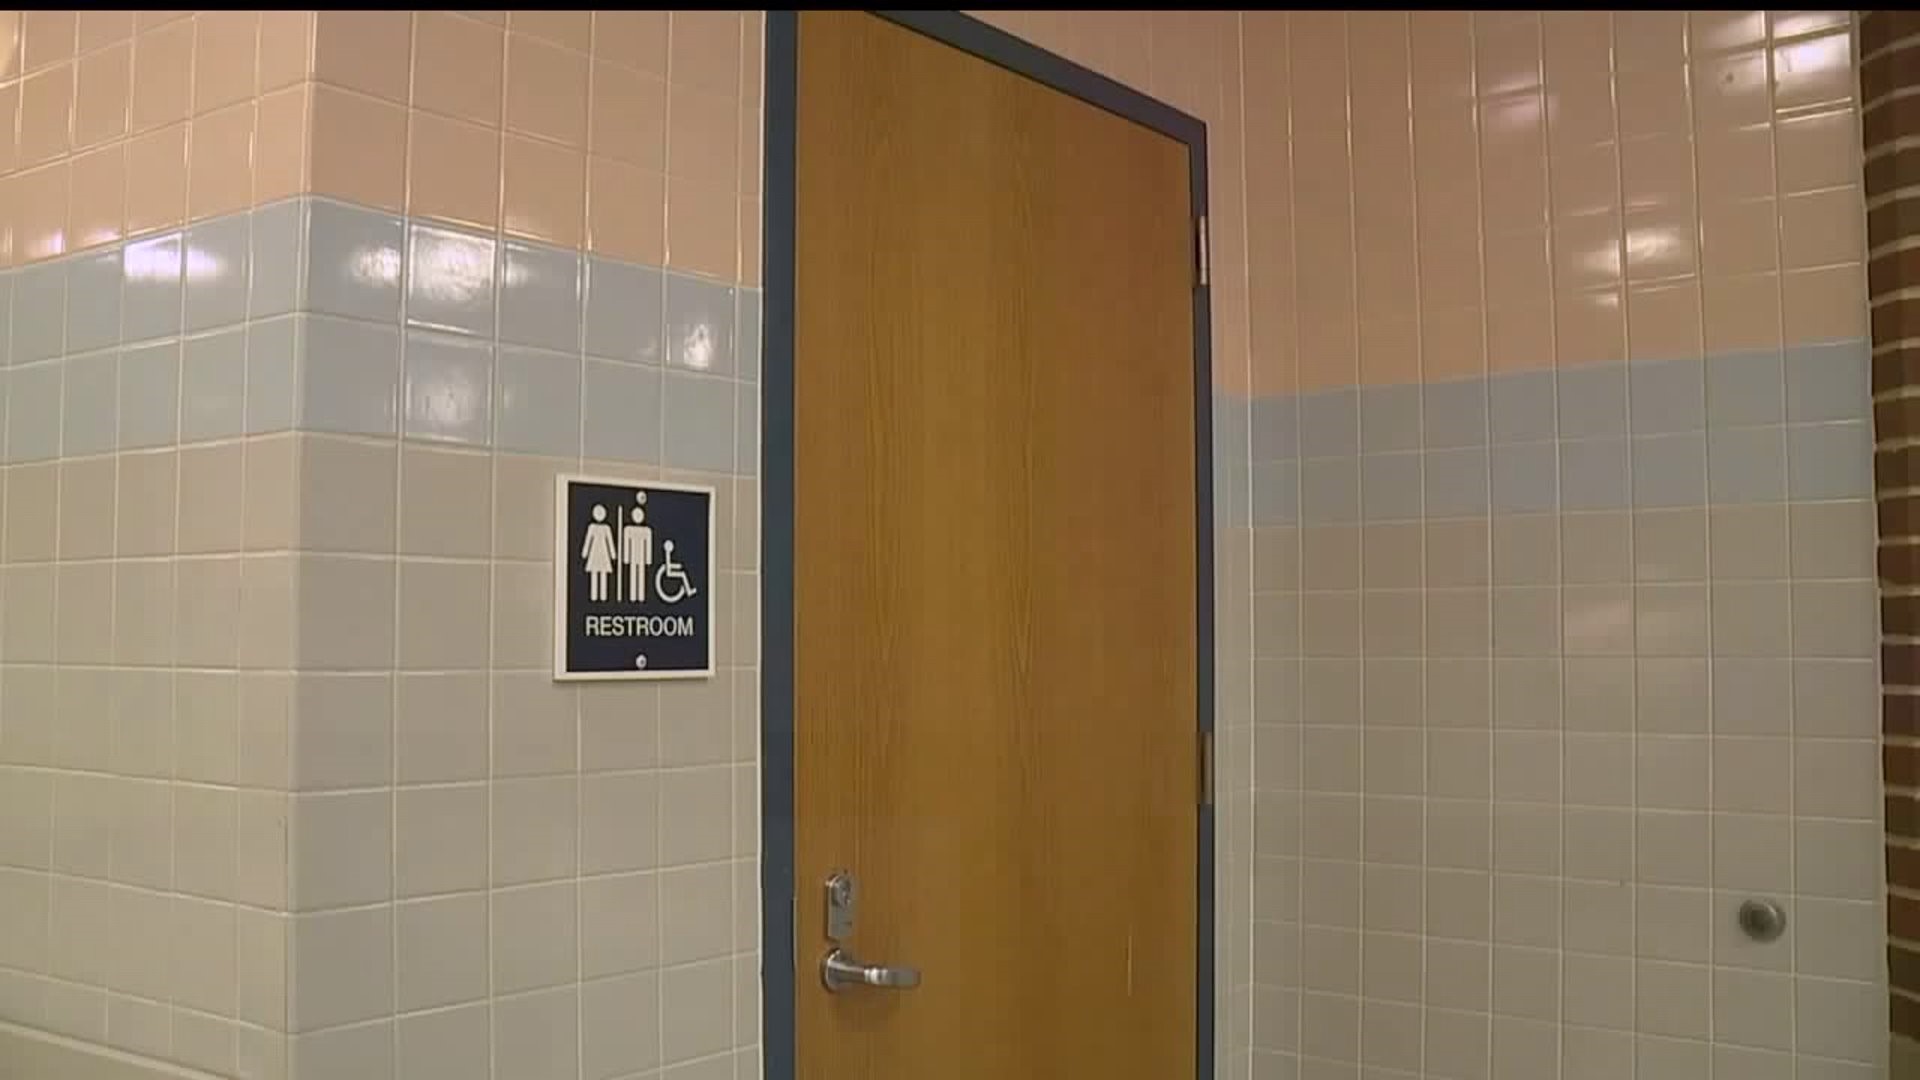 Eastern Lancaster County School District discusses bathroom controversy